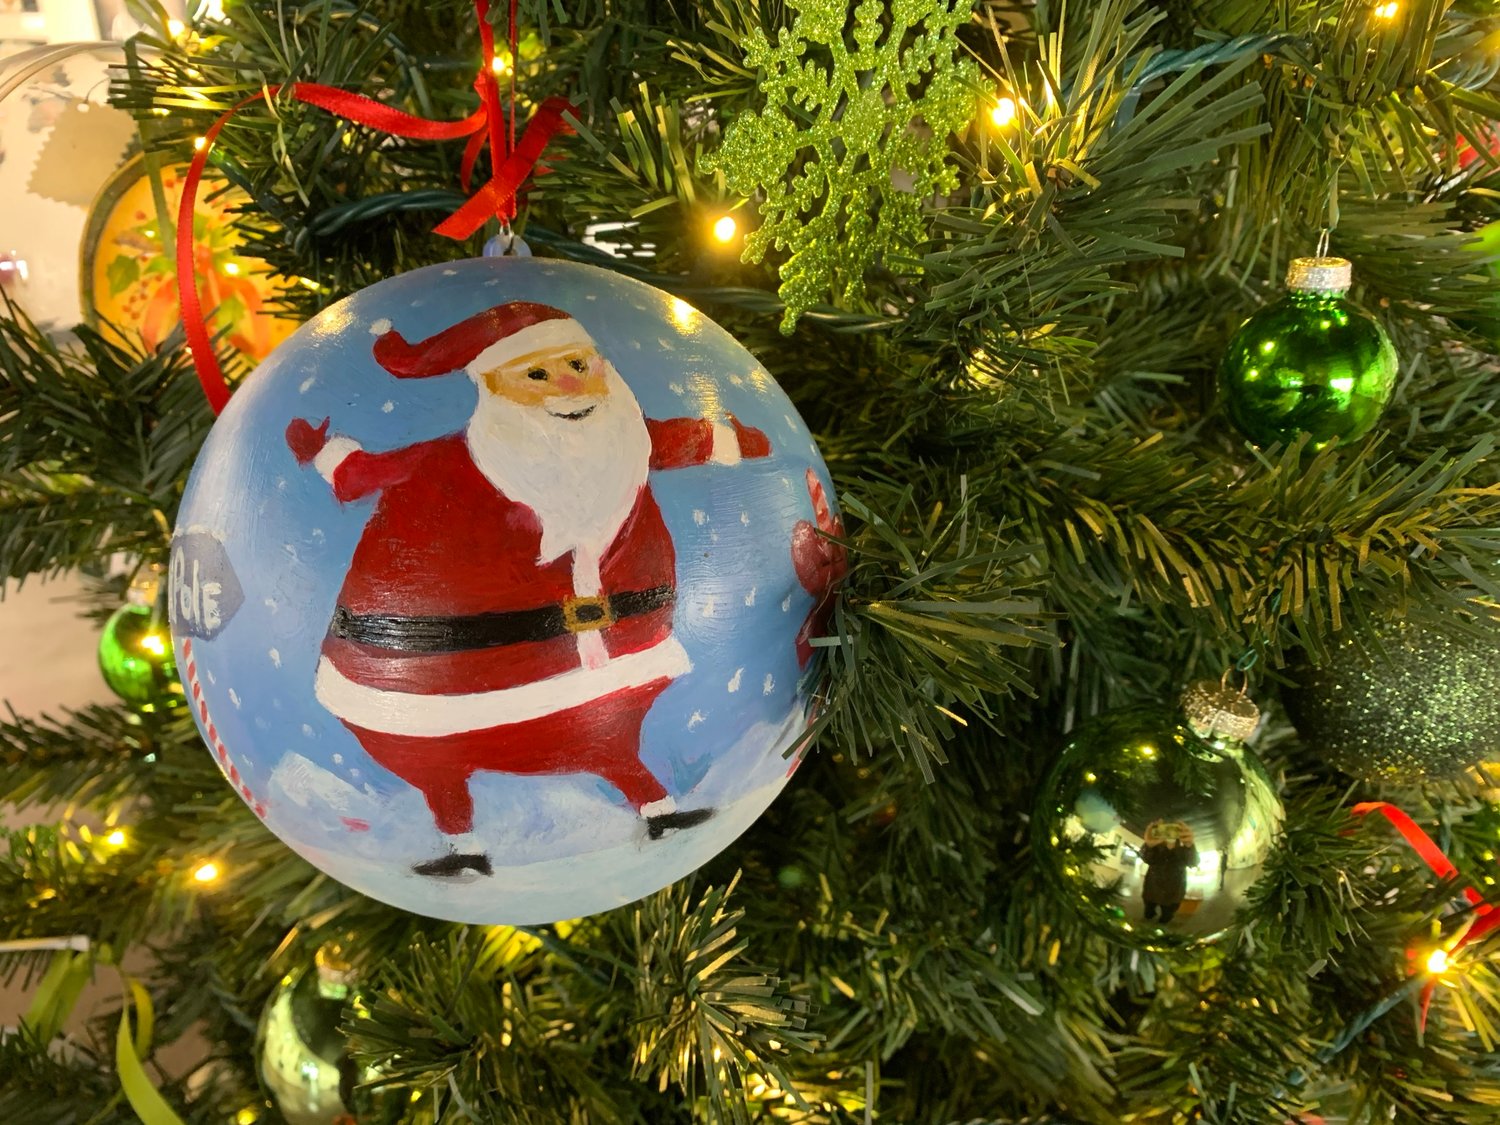 A Santa ornament at the Mas Art Gallery welcomes the holiday with joy and open arms.